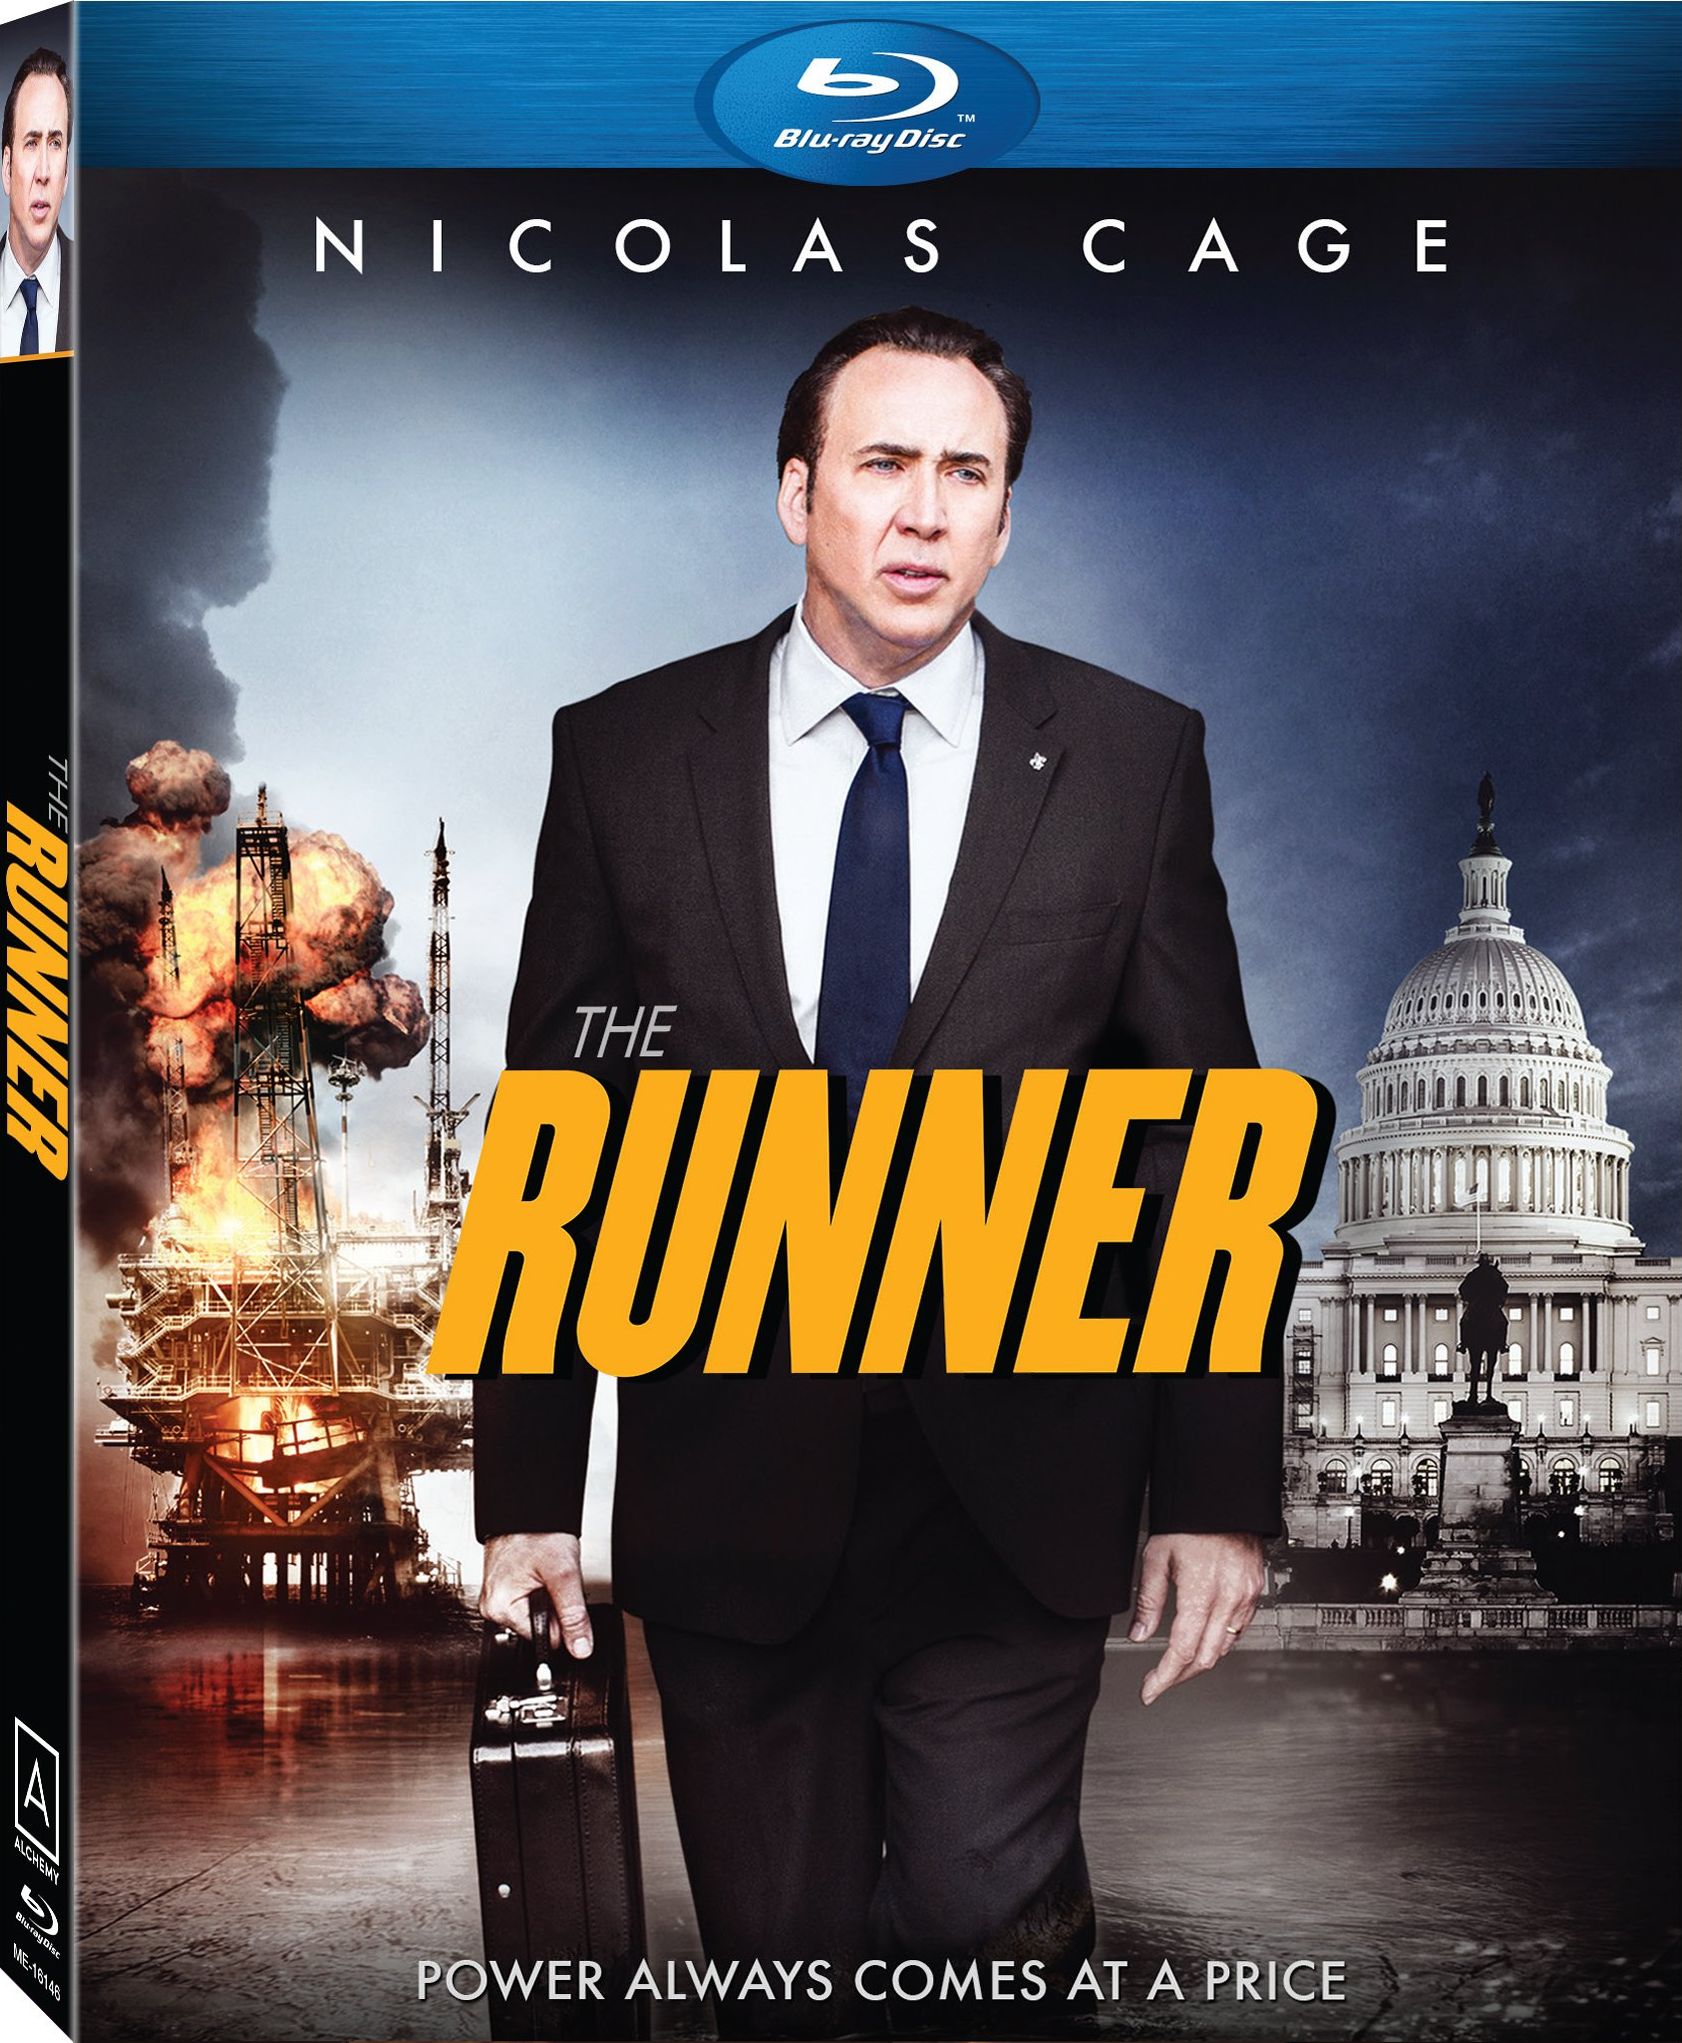 The Runner Blu-ray Review